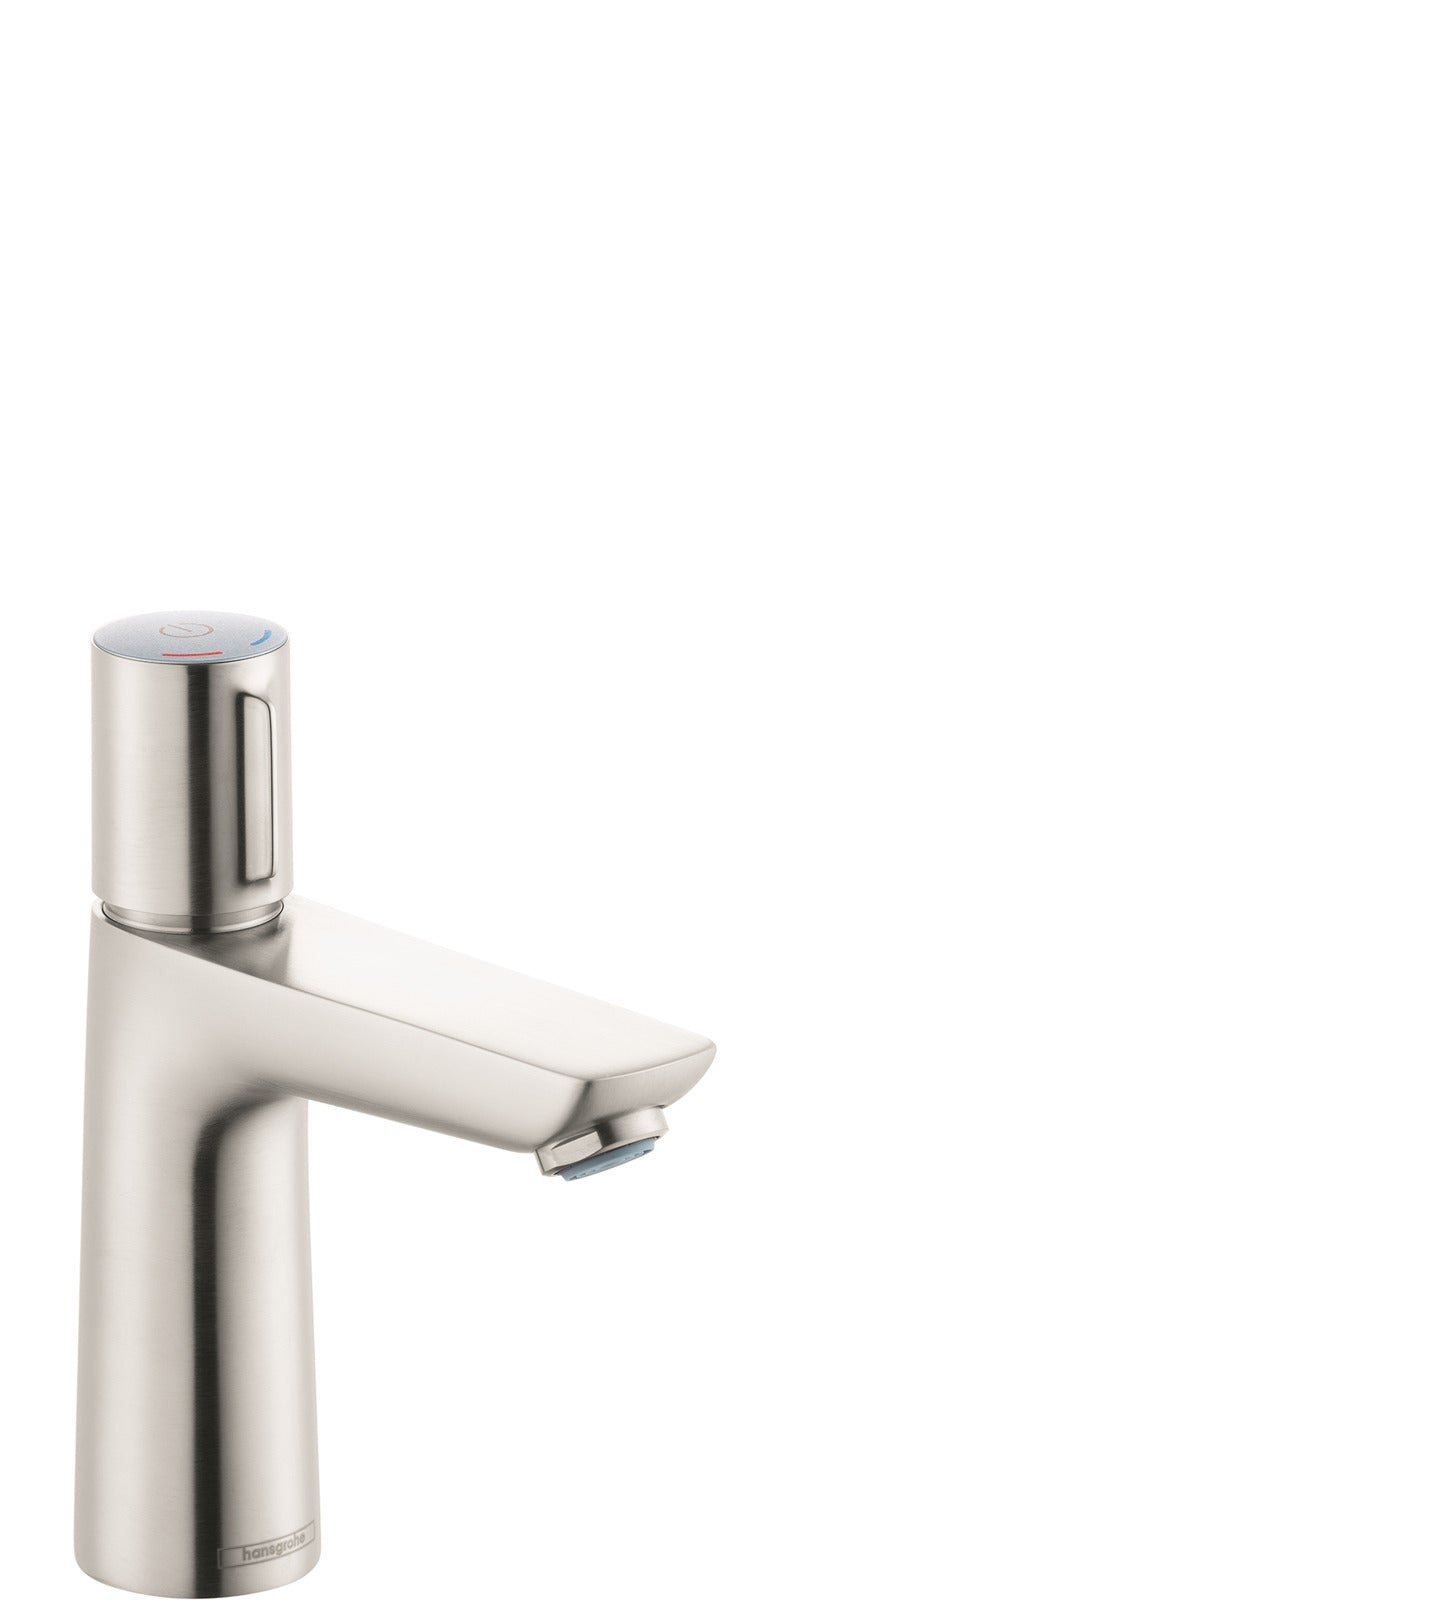 HANSGROHE 71750821 Brushed Nickel Talis Select E Modern Single Hole Bathroom Faucet 1.2 GPM